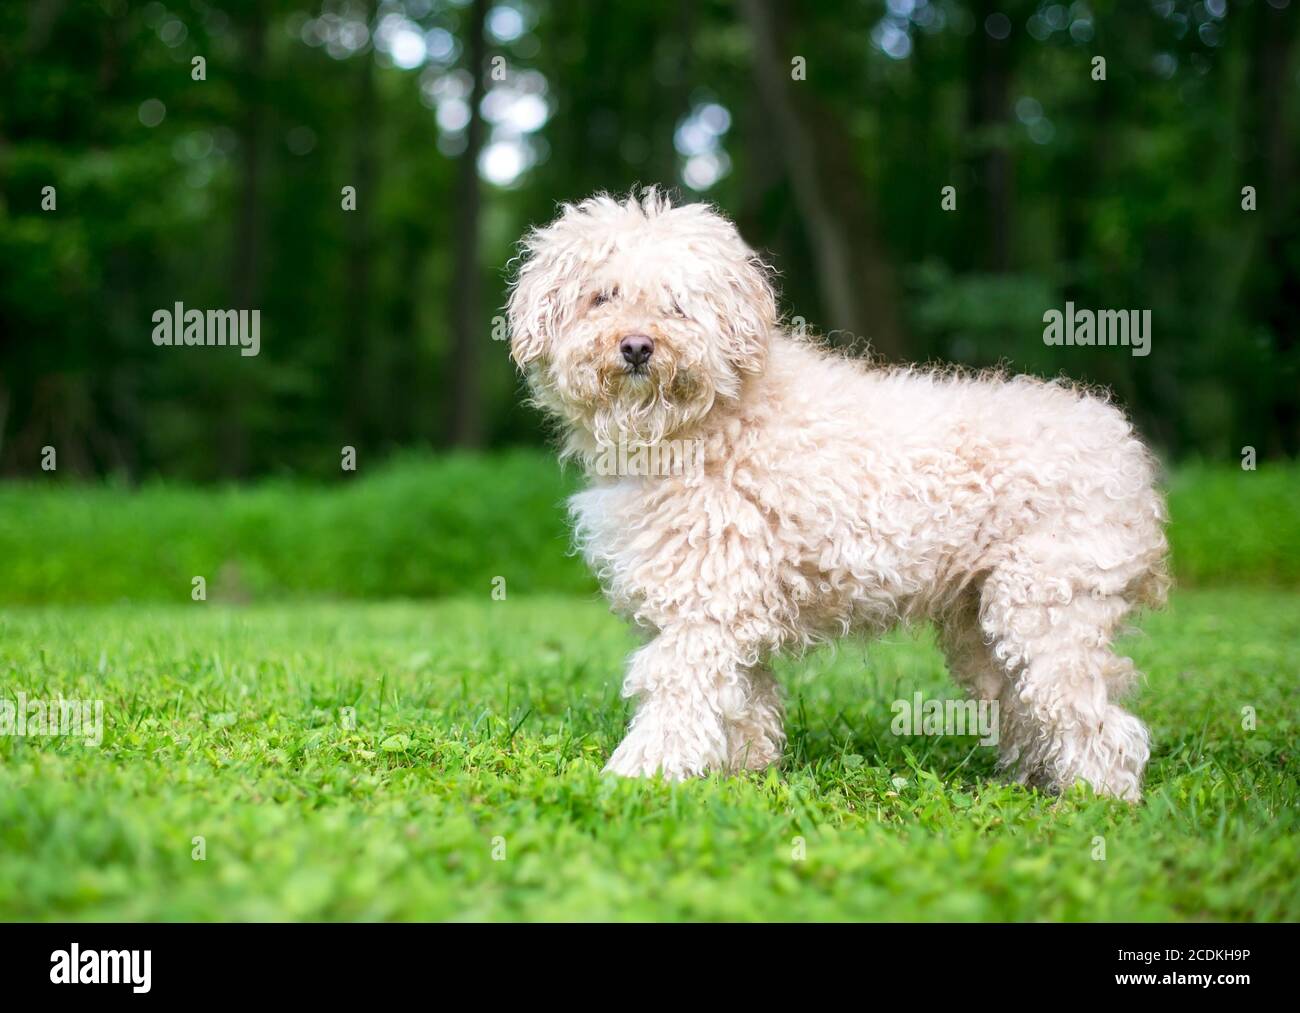 A shaggy Puli sheepdog mixed breed dog with curly hair standing outdoors Stock Photo